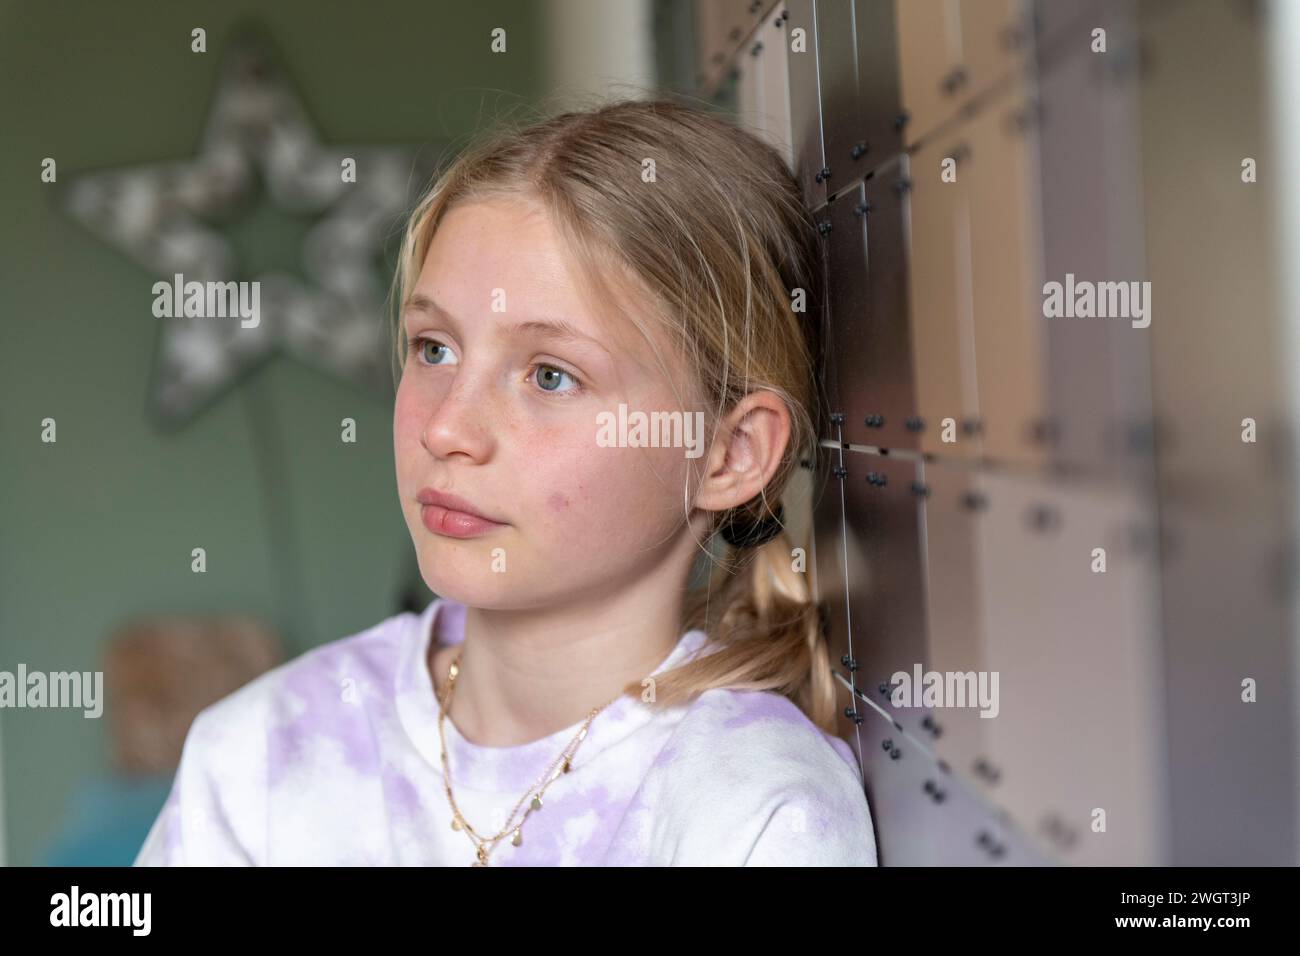 Young girl teenager leaning on the wall relaxing Stock Photo